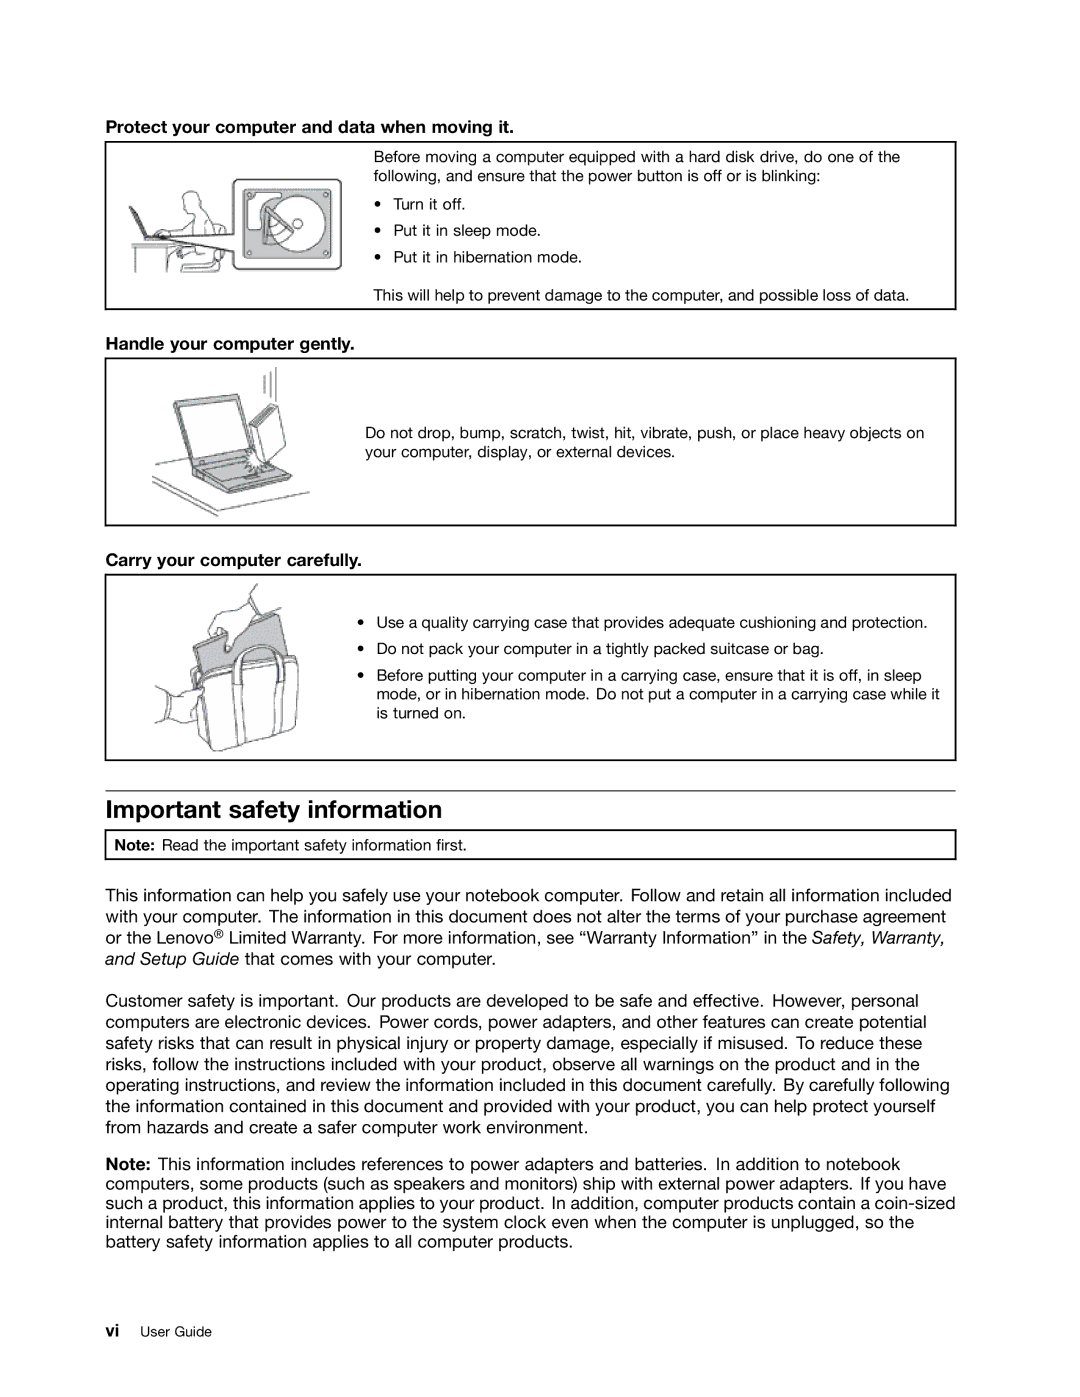 Lenovo T431s Important safety information, Protect your computer and data when moving it, Handle your computer gently 